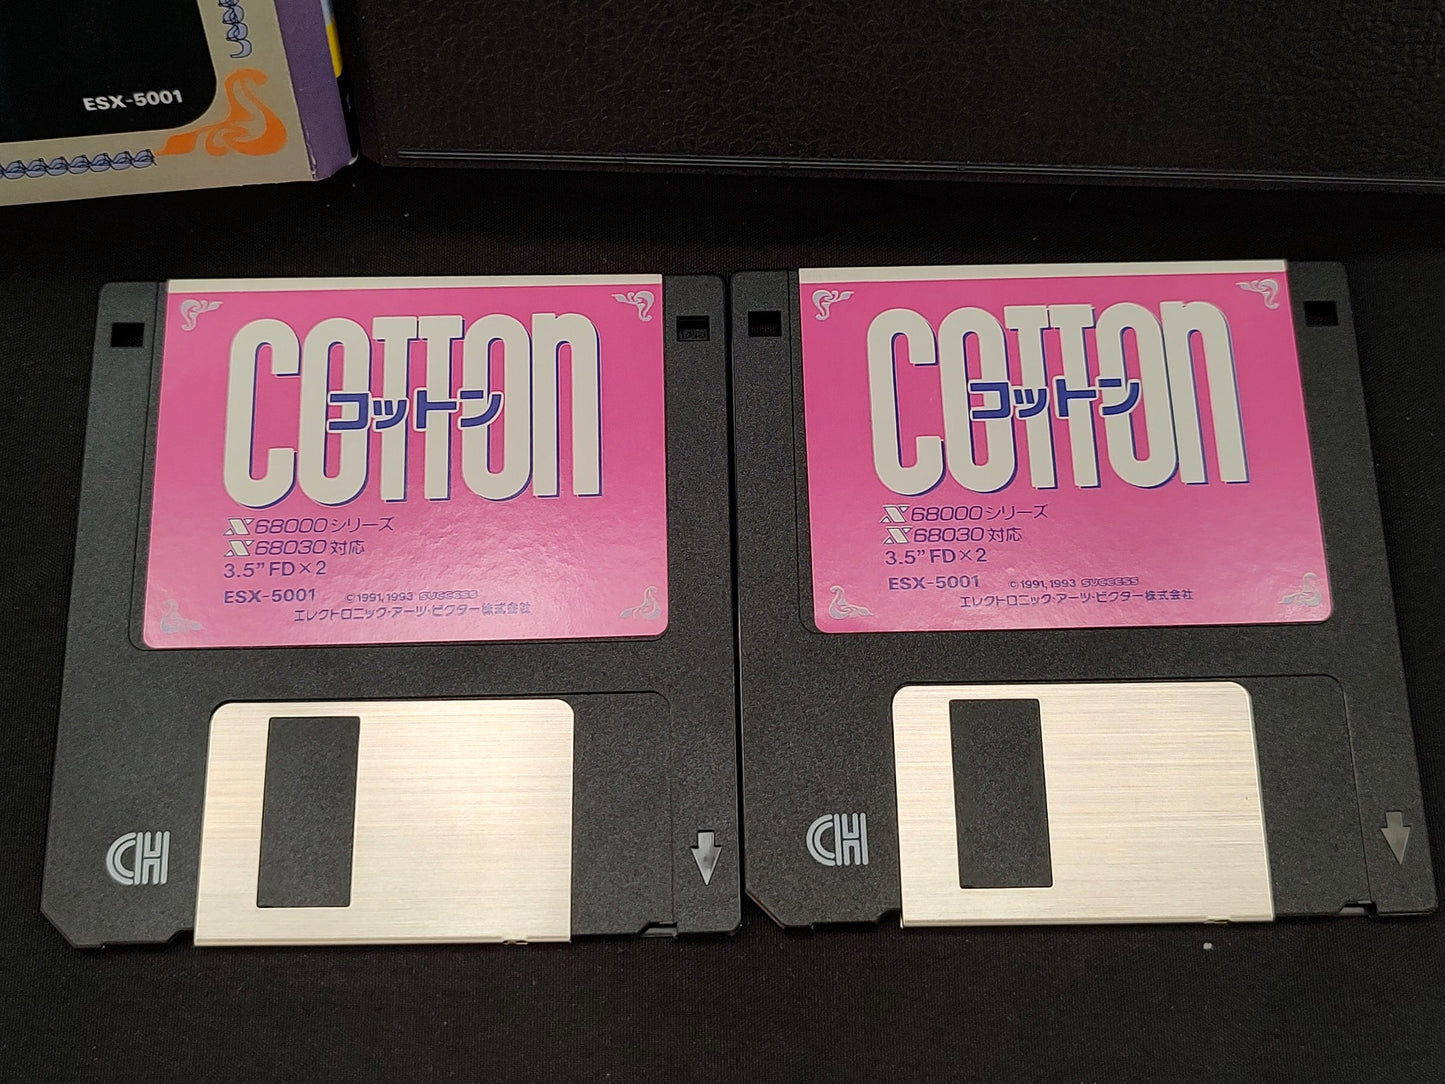 COTTON SHARP X68000 Game 3.5 inch Floppy Disks, W/Manual, Box, Not tested-g0104-